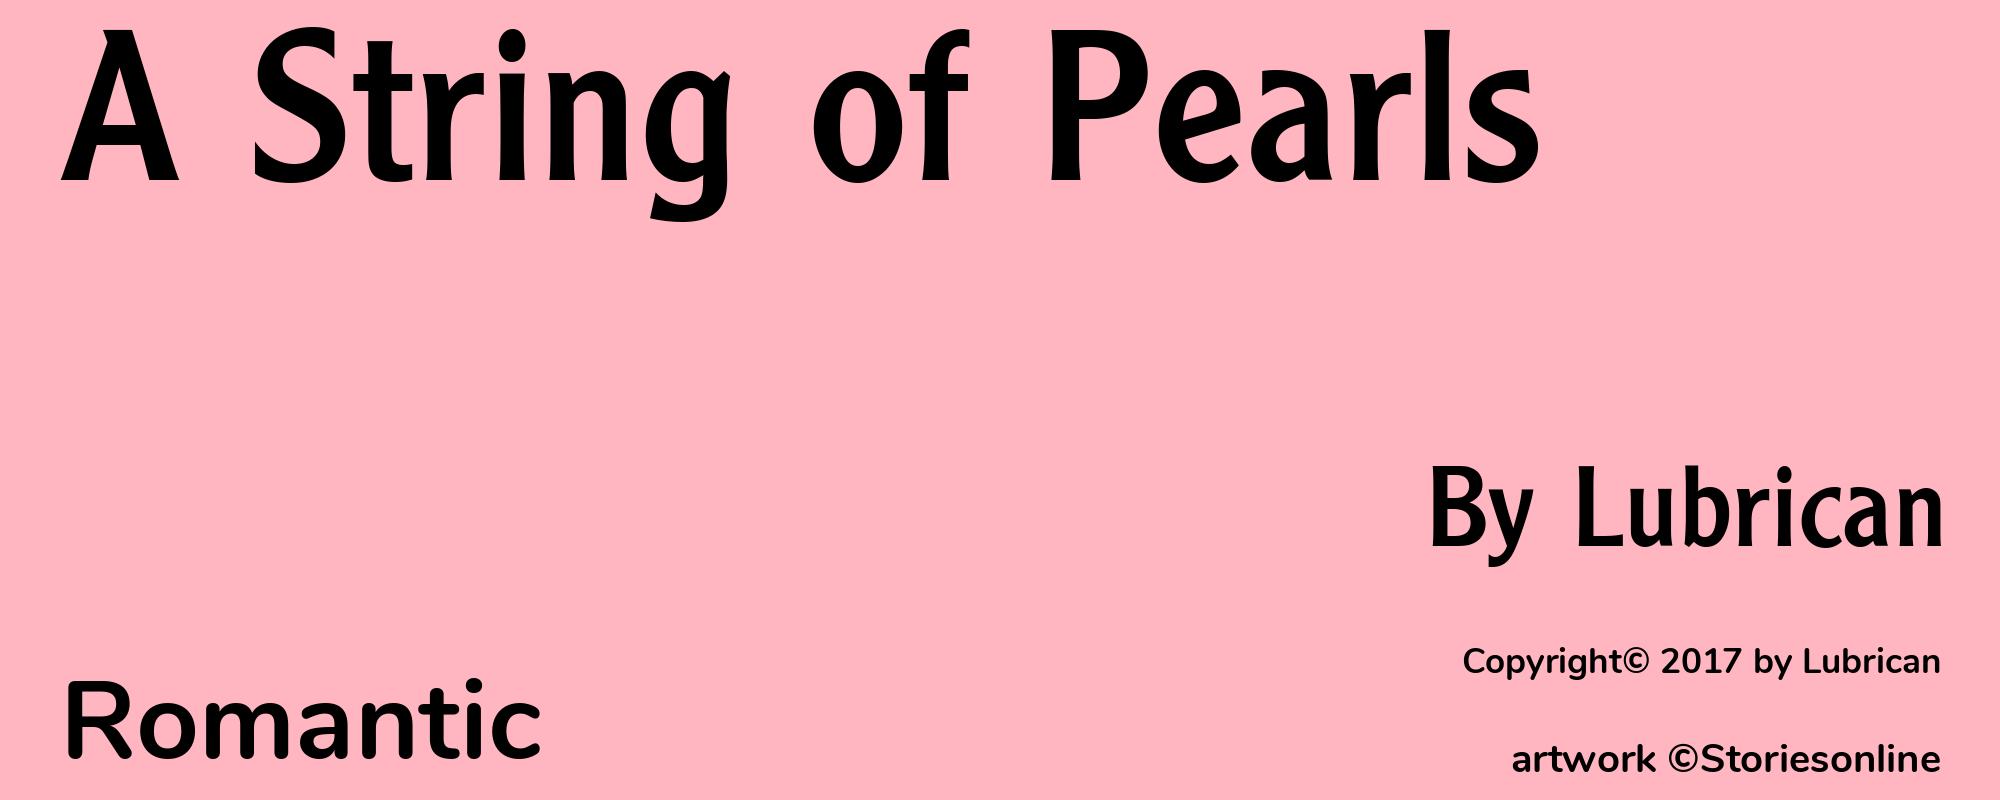 A String of Pearls - Cover